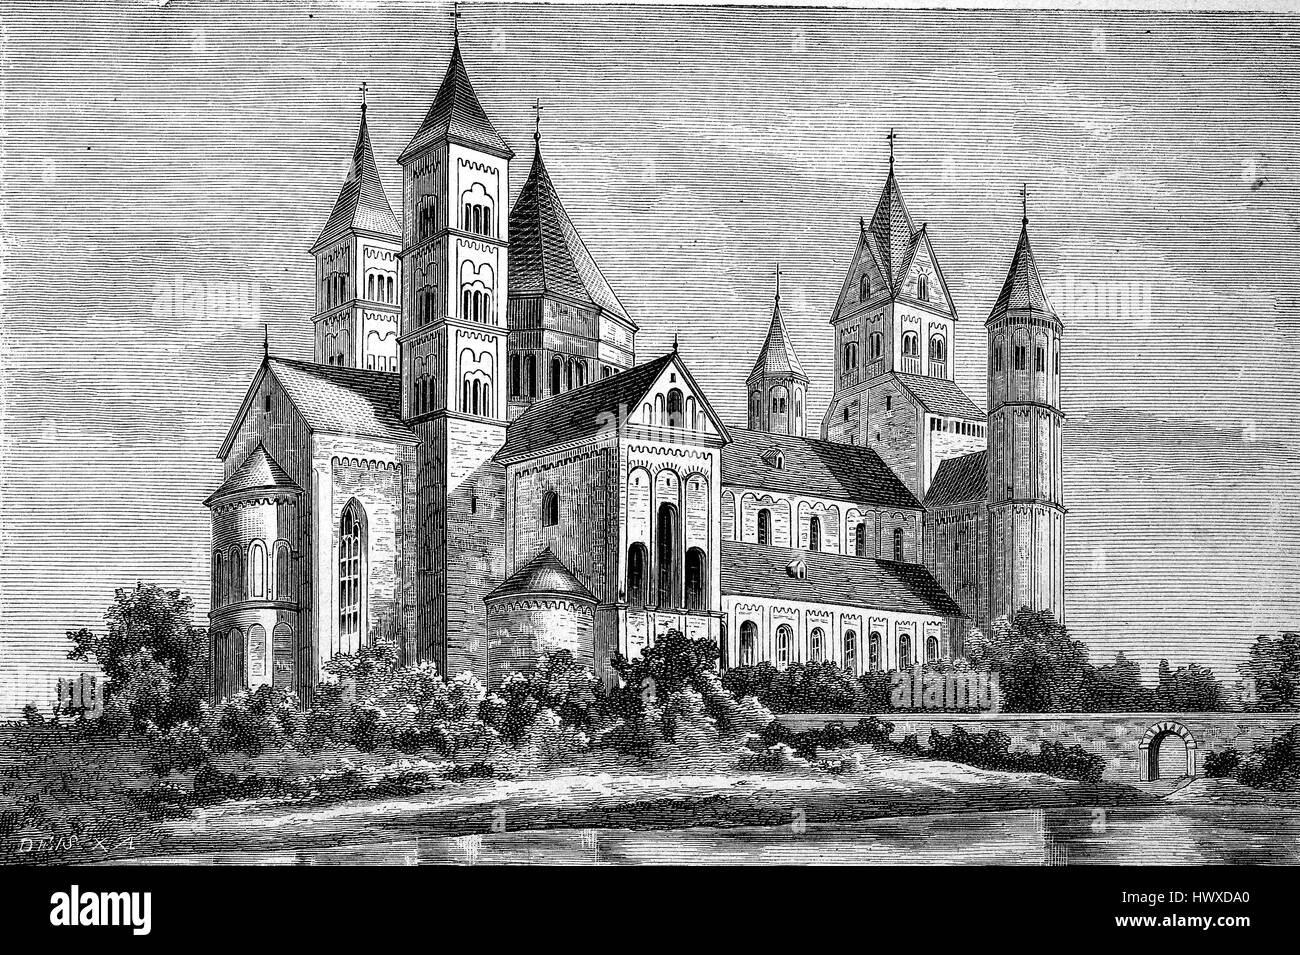 Maria Laach Abbey is a Benedictine abbey situated on the southwestern shore of the Laacher See, Lake Laach, near Andernach, in the Eifel region of the Rhineland-Palatinate in Germany, reproduction of an image, woodcut from the year 1881, digital improved Stock Photo